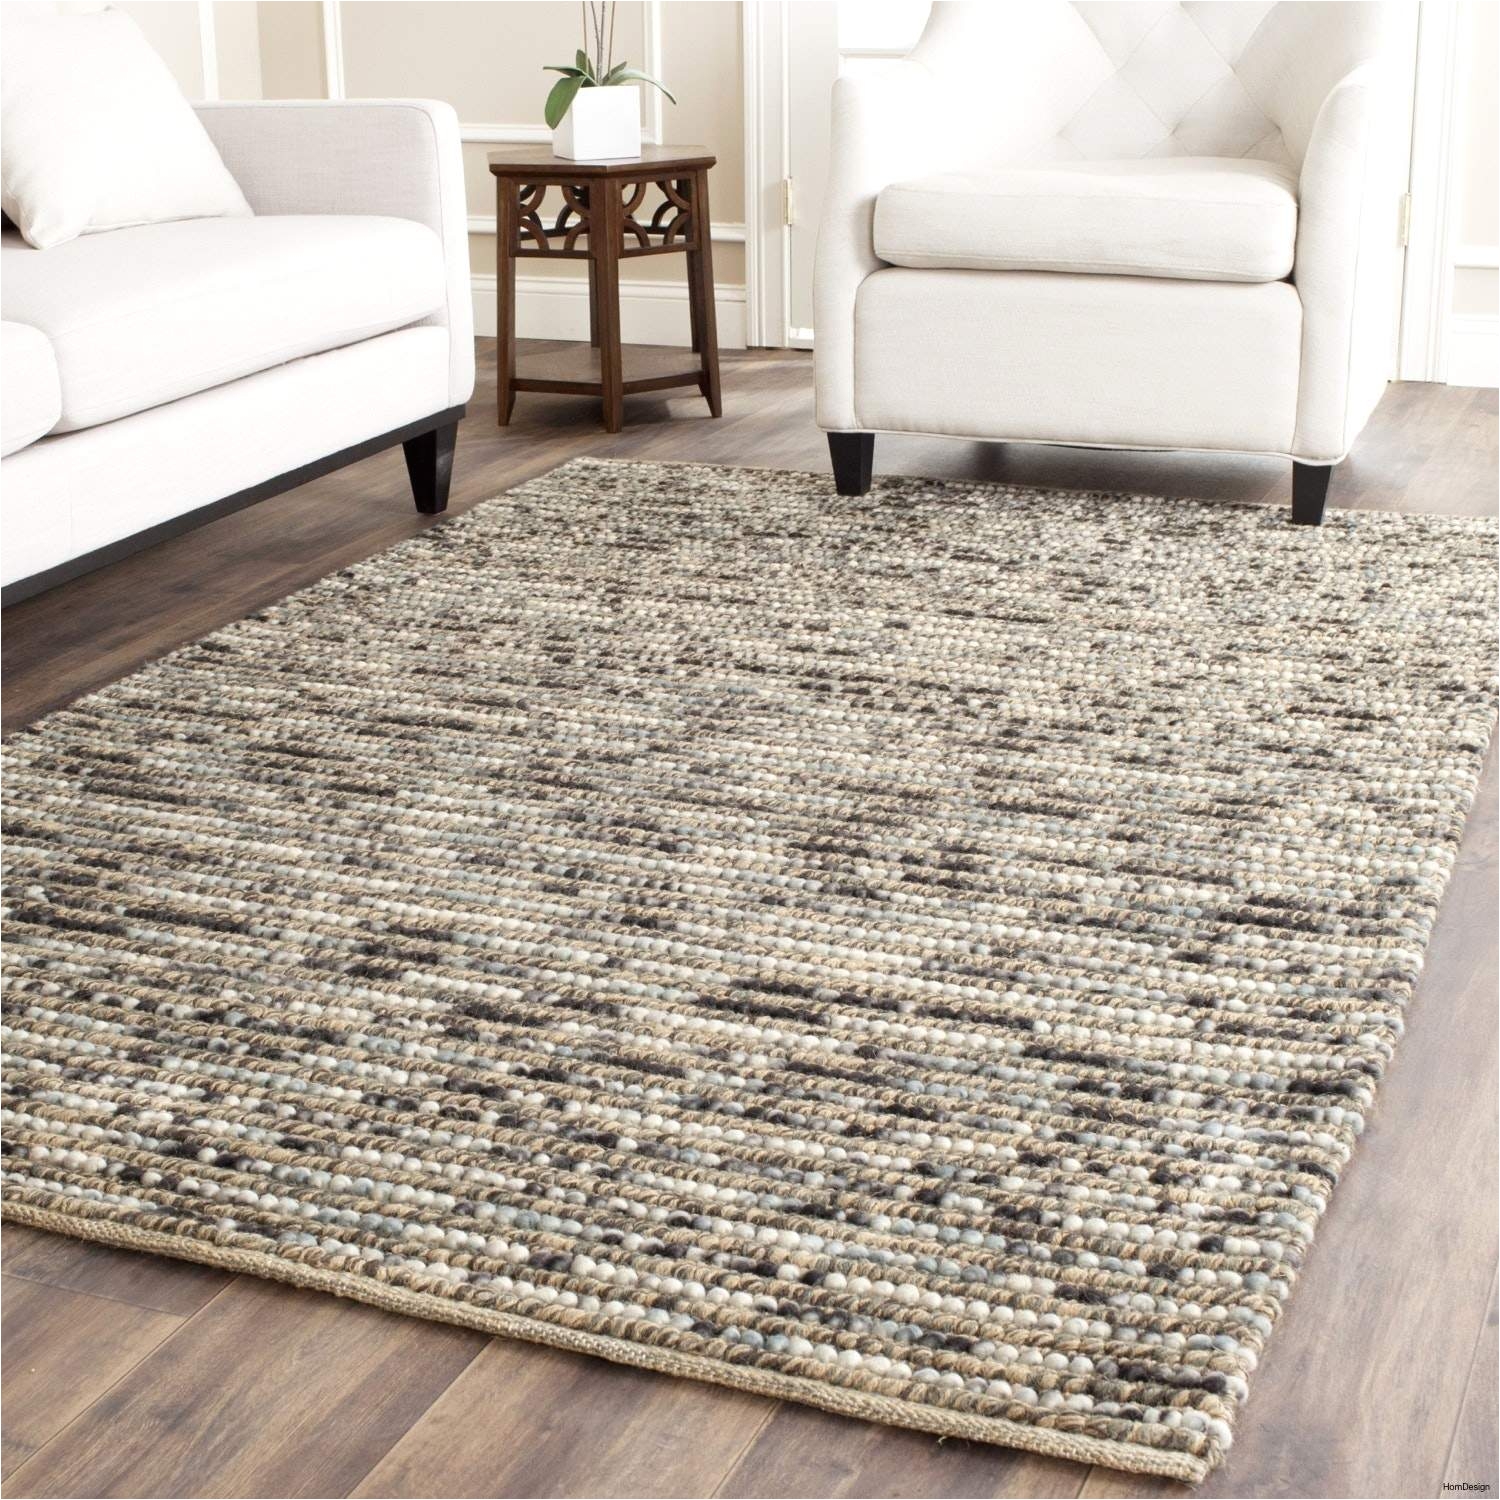 4 piece area rug sets elegant rugged new cheap area rugs blue rug as gold and